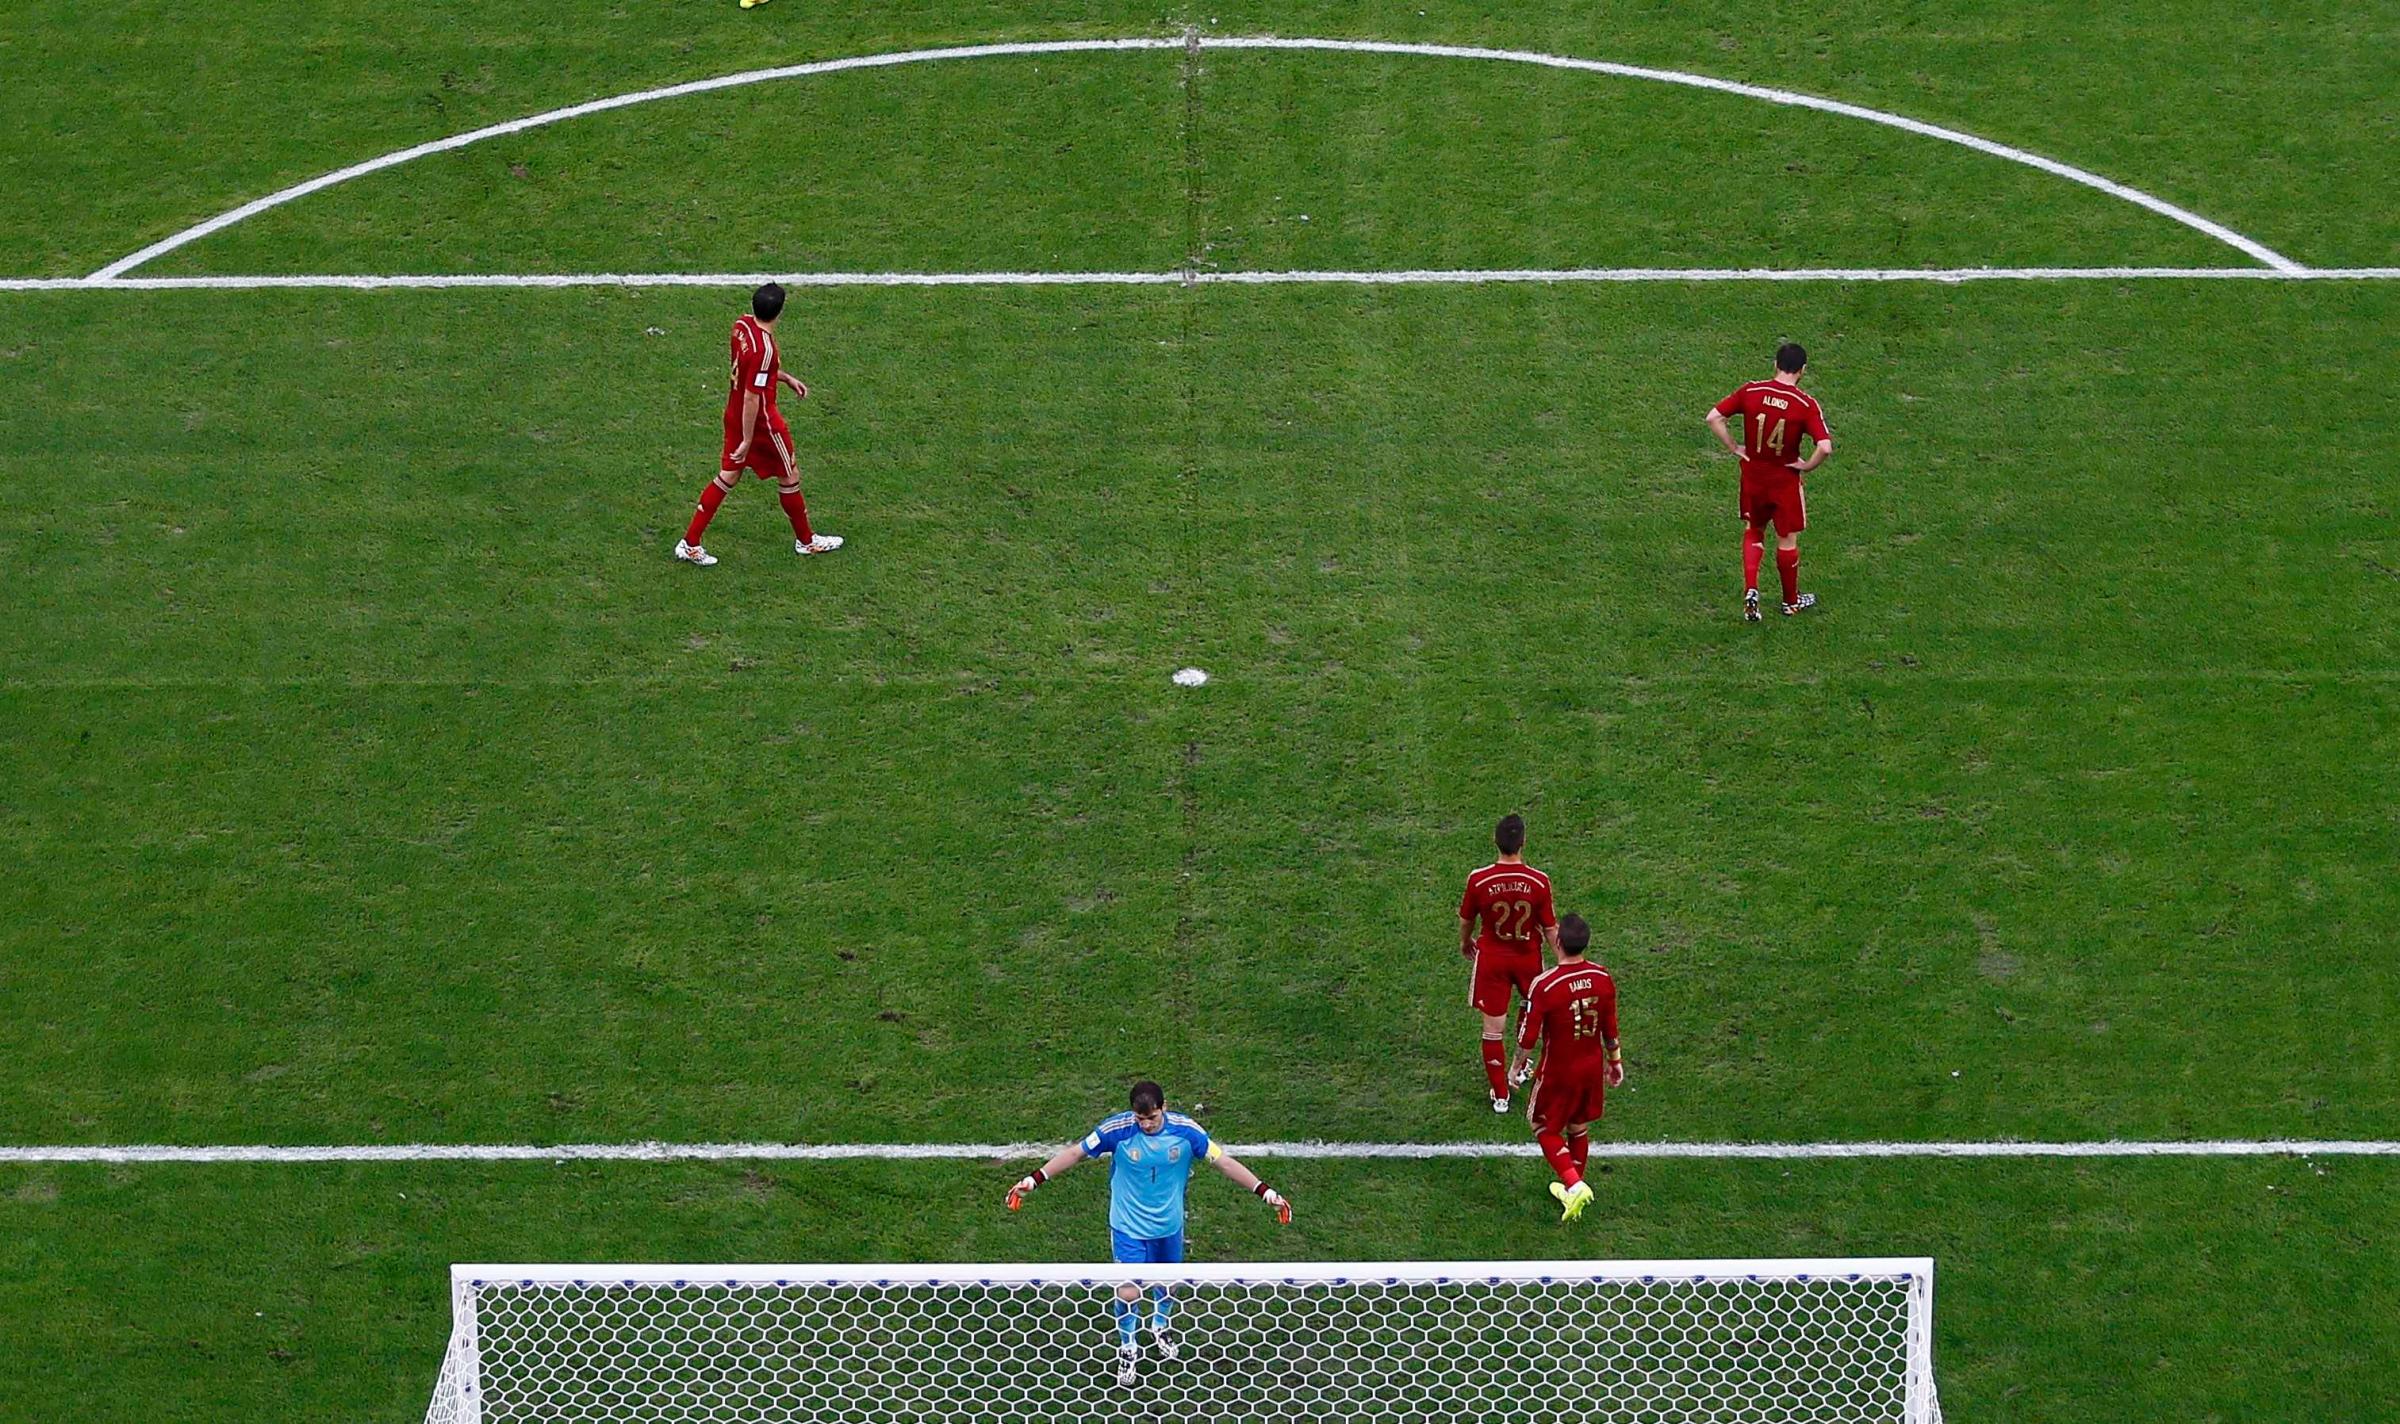 Spain players react after a goal by Chile's Eduardo Vargas during the 2014 World Cup Group B soccer match at the Maracana stadium in Rio de Janeiro on June 18, 2014.